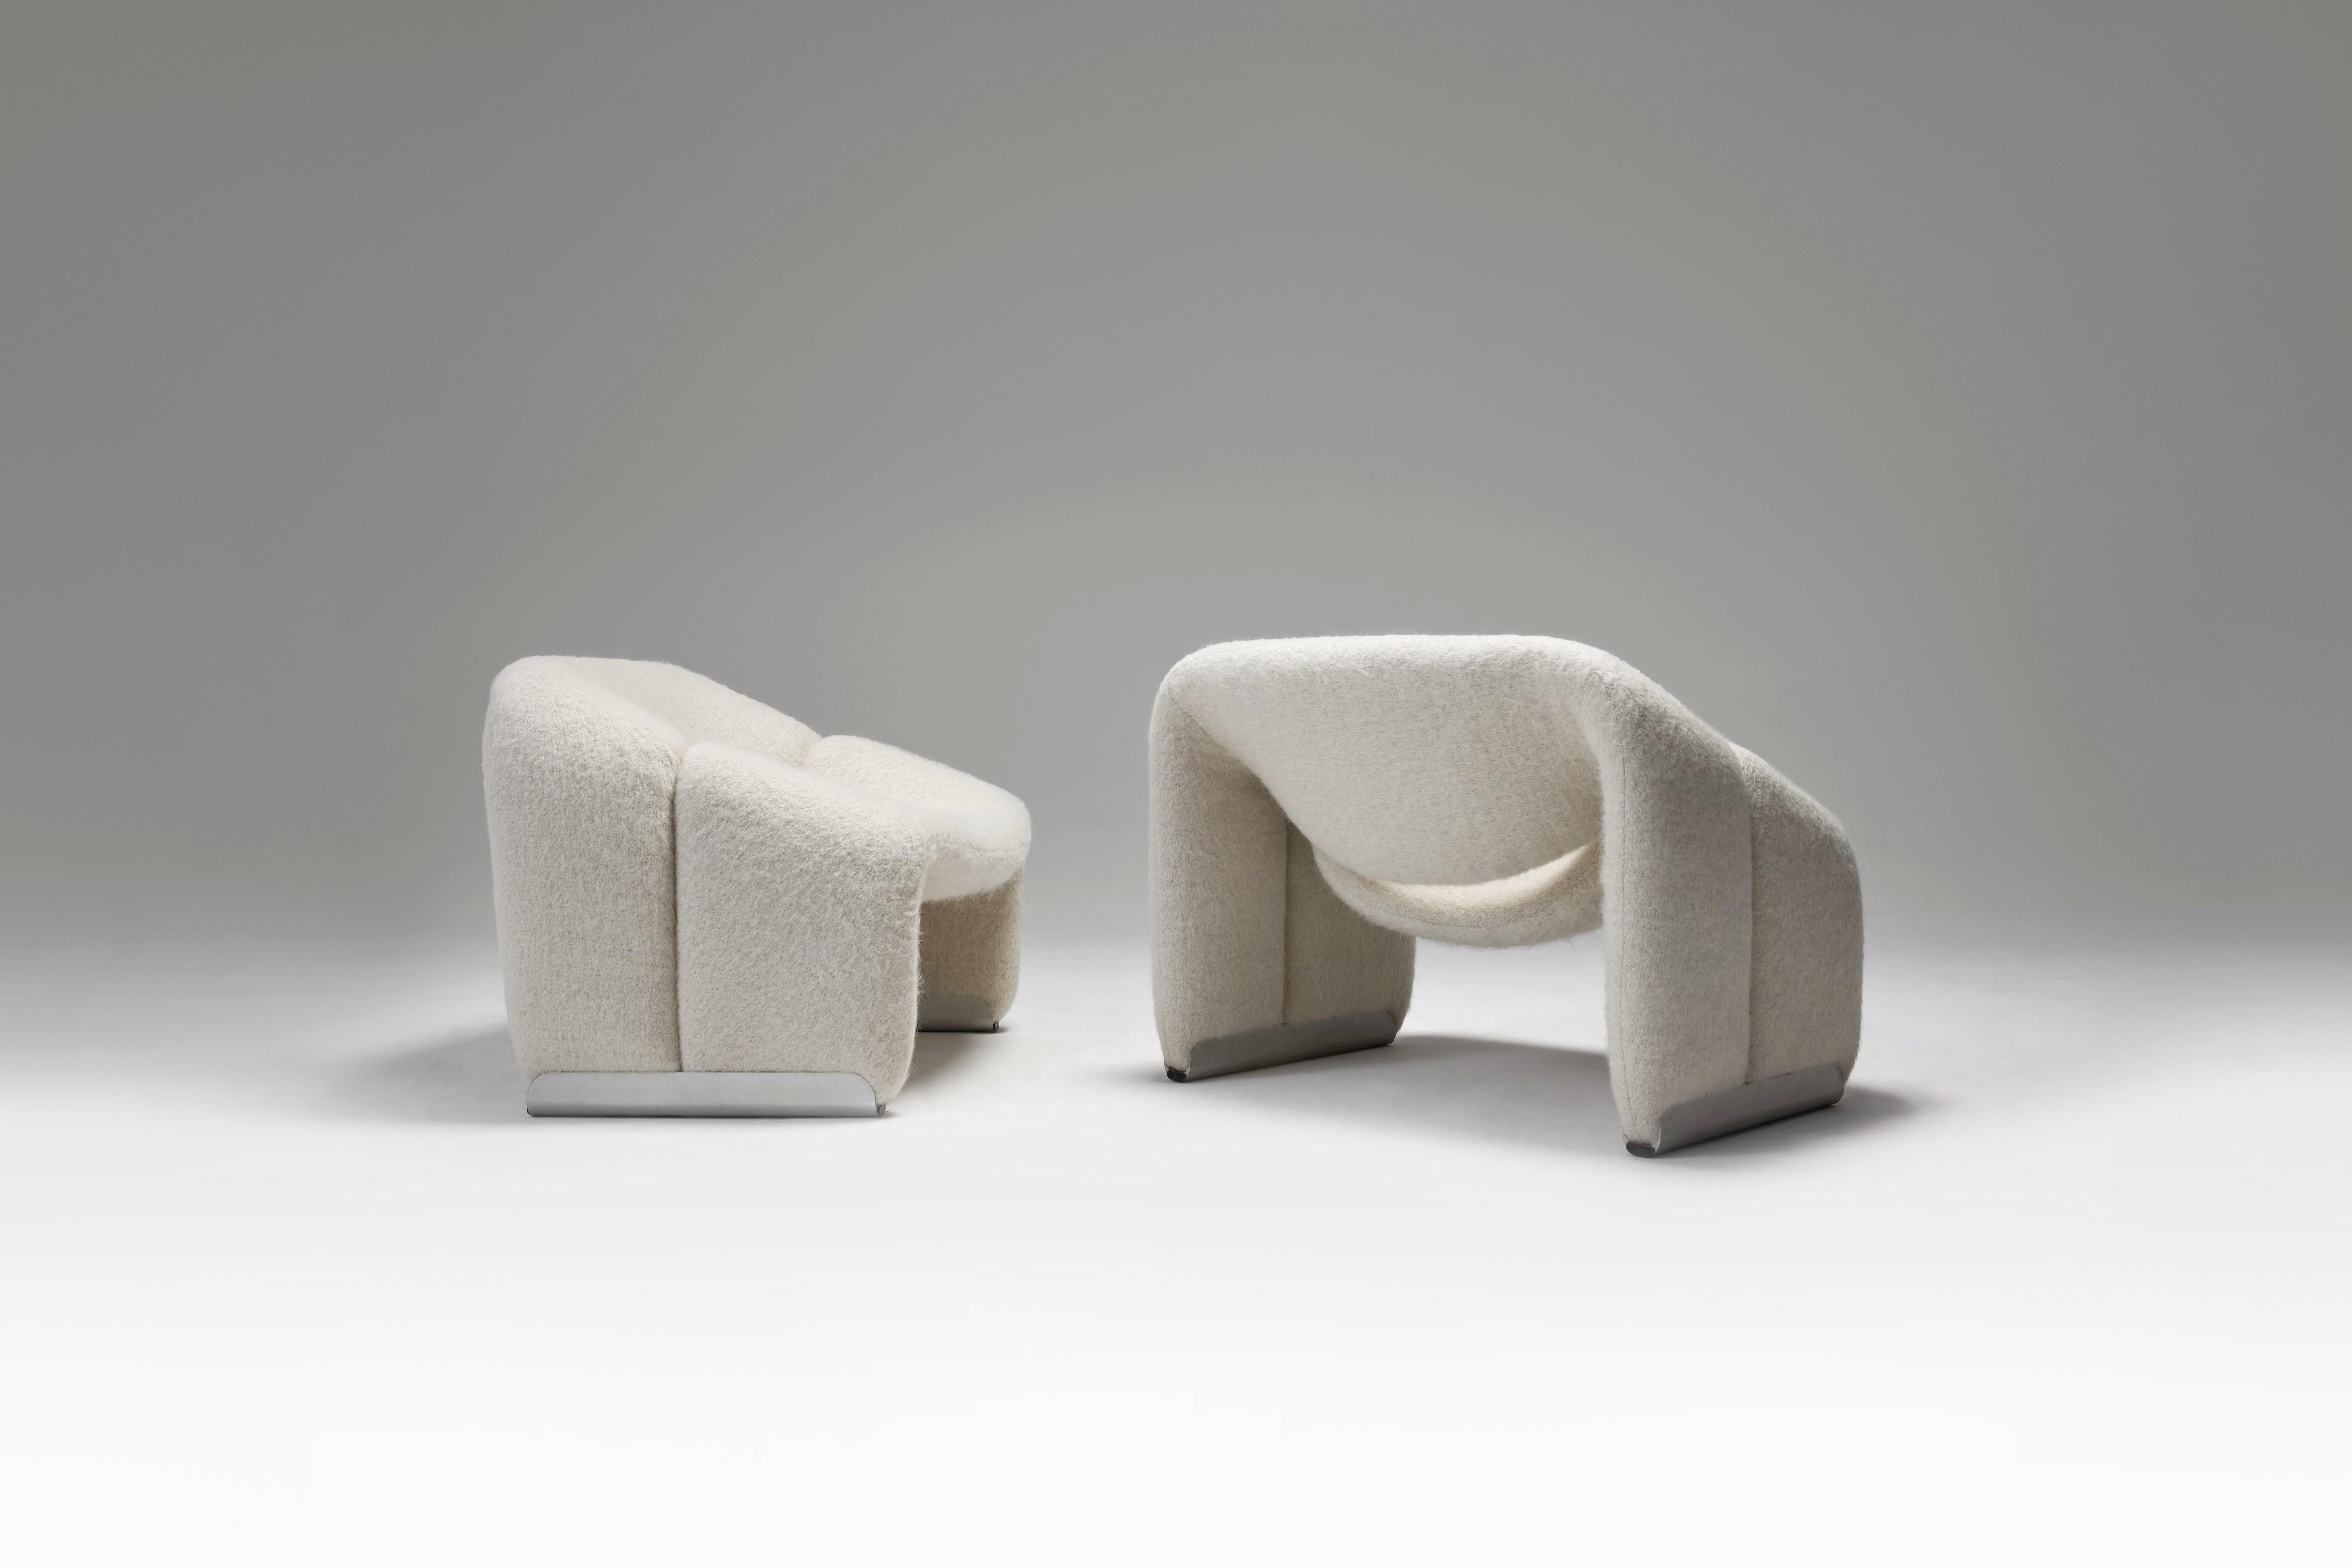 Dutch Pierre Paulin Pair of F598 Groovy Armchairs for Artifort Netherlands, 1972 